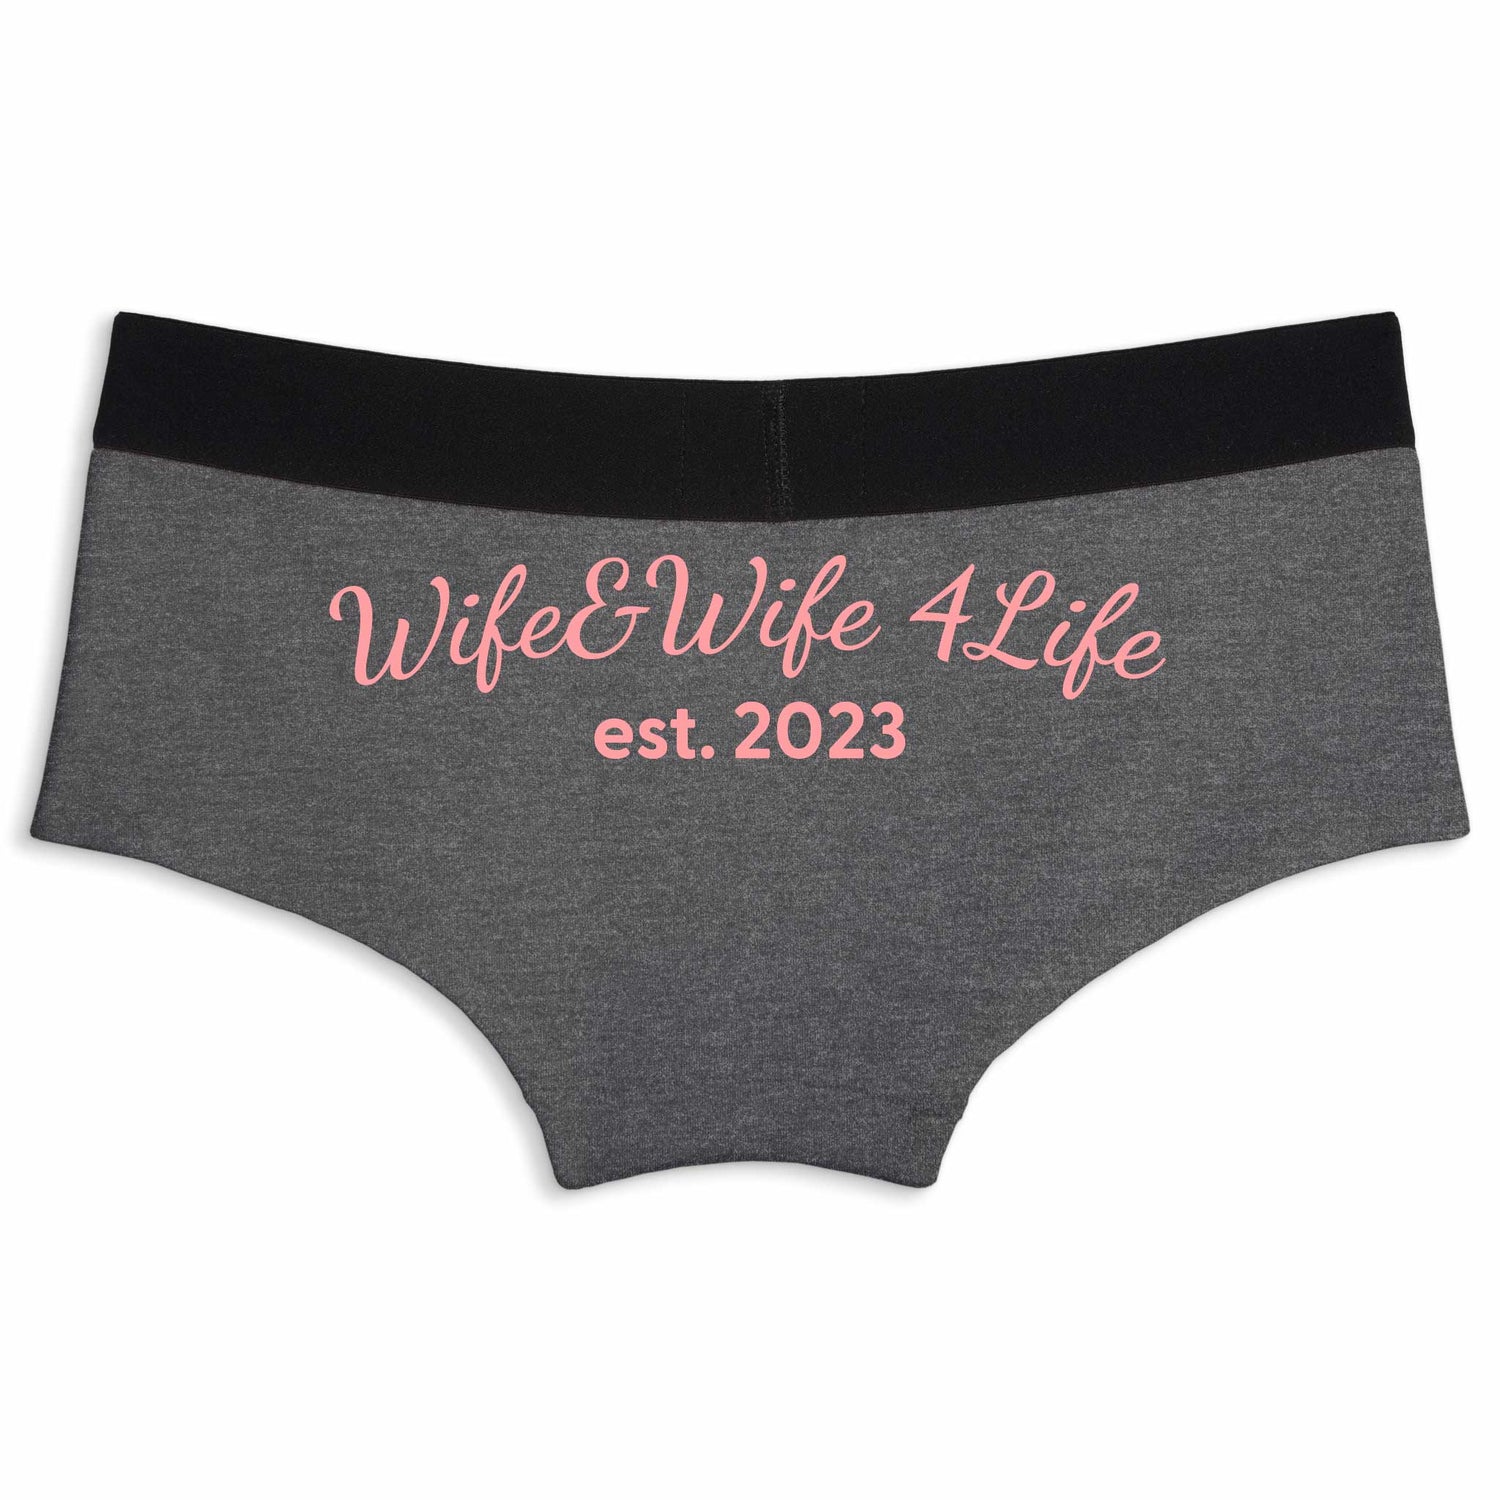 wife and wife for life | Boyshort underwear